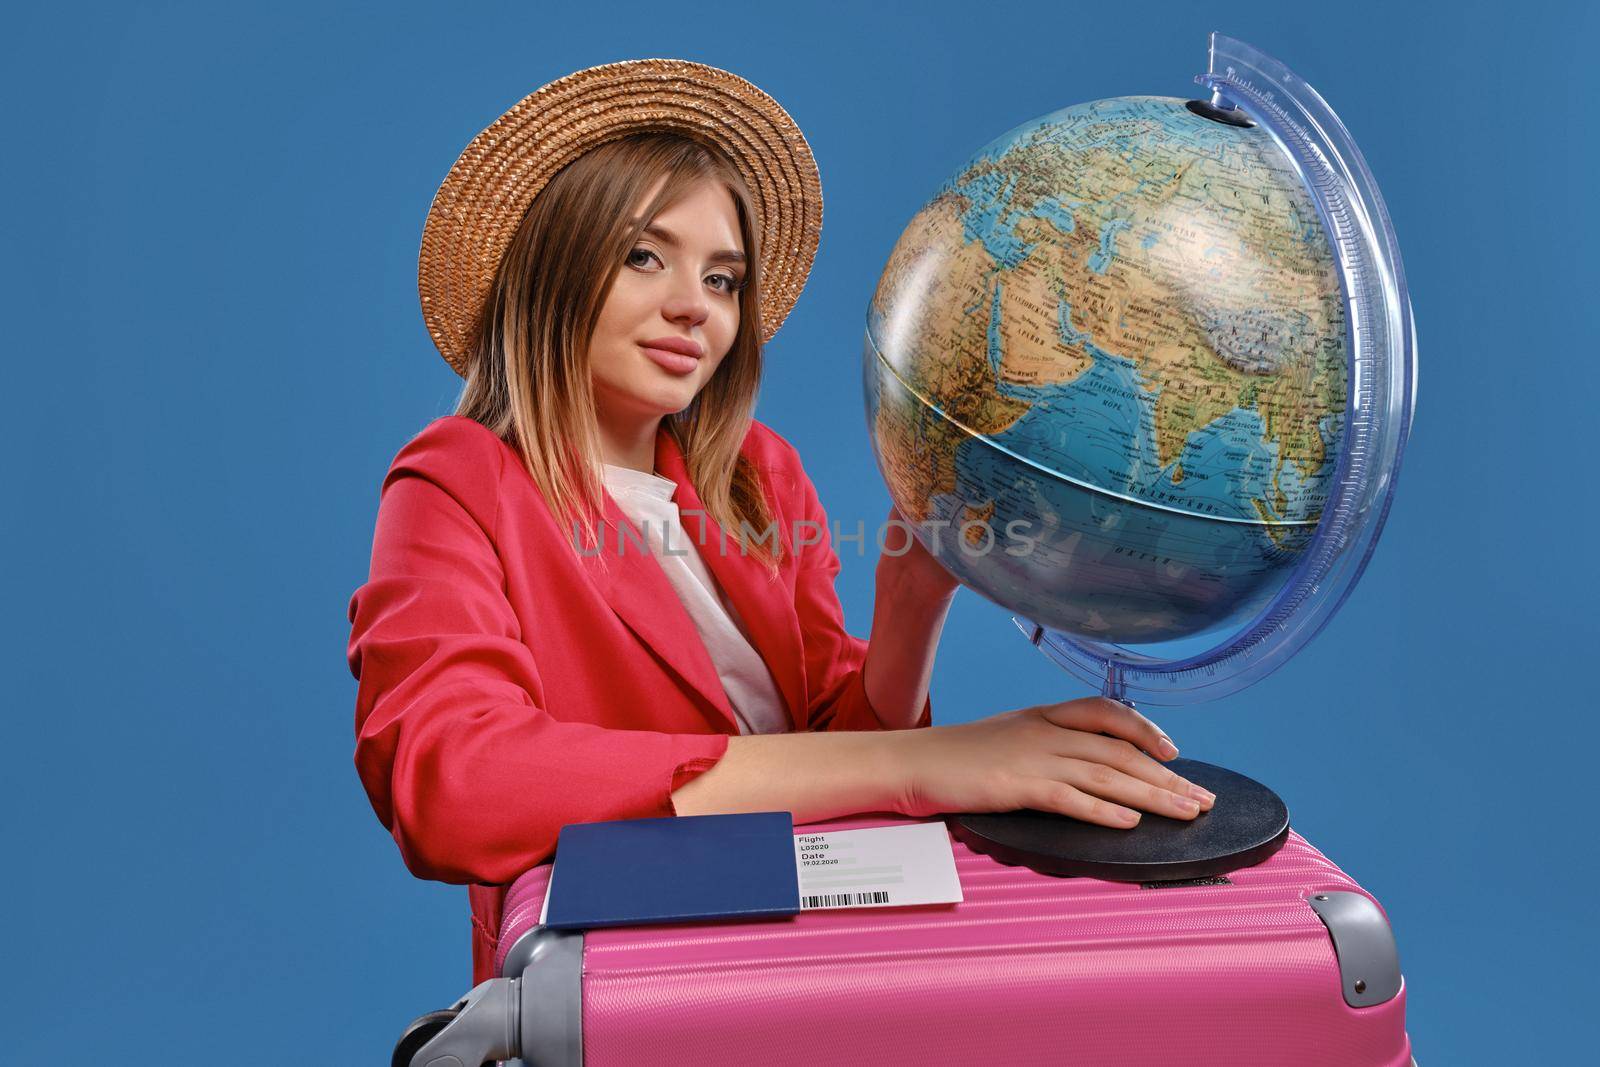 Elegant blonde girl in straw hat, white blouse, red jacket. She smiling, holding globe standing on pink suitcase, passport and ticket are nearby, posing on blue background. Close-up, copy space